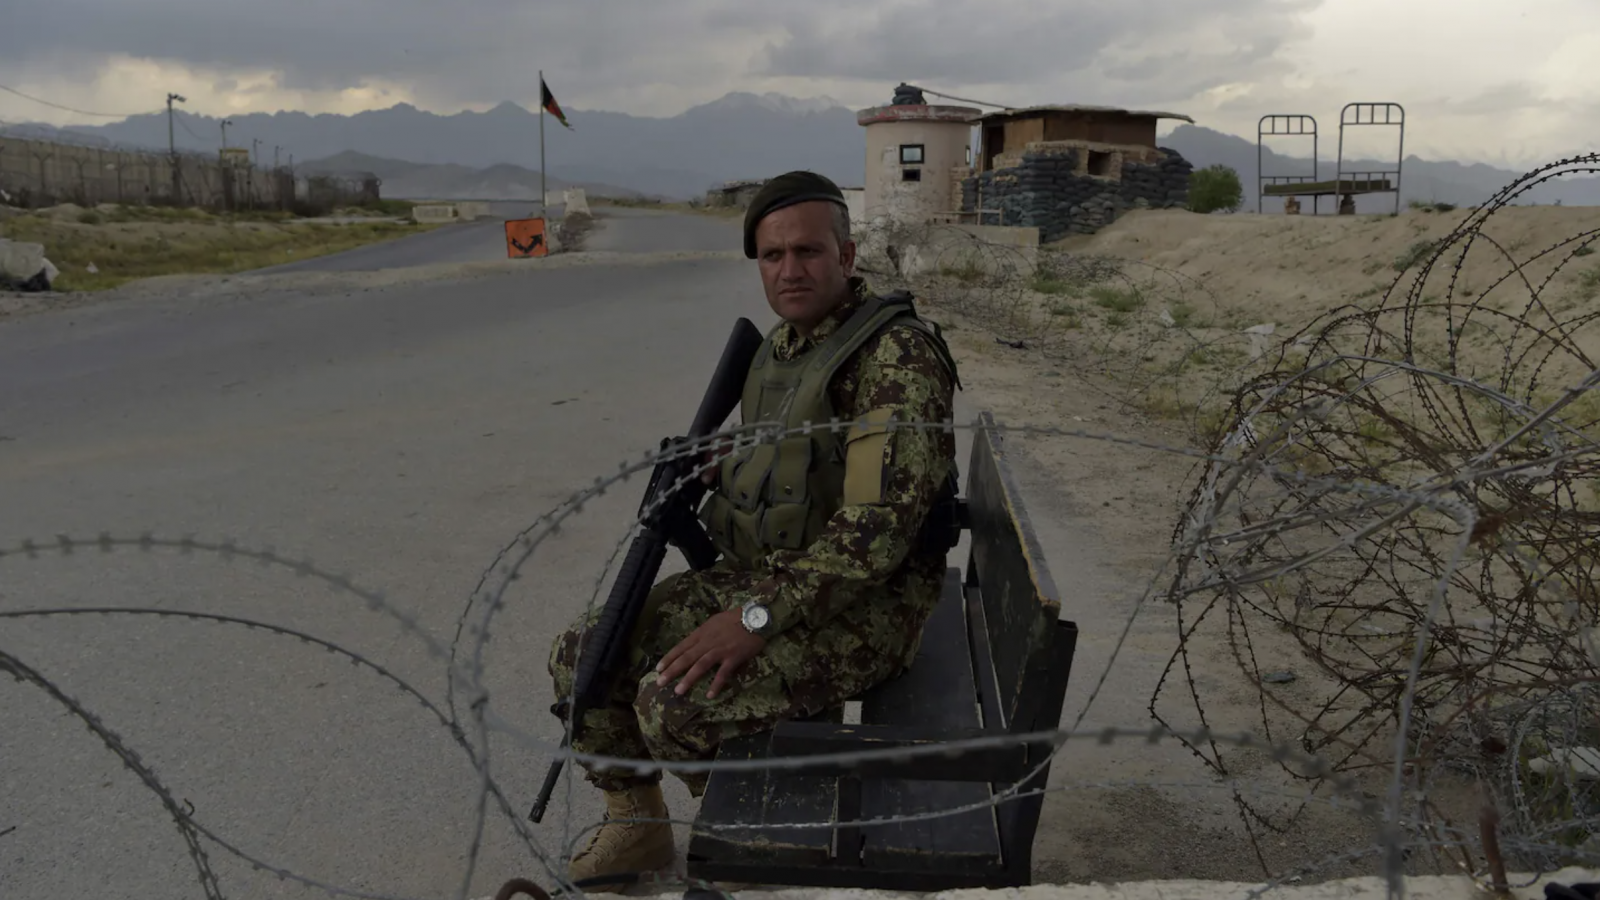 An Afghan soldier in green camouflage holds a black rifle as he sits by a road behind barbed wire